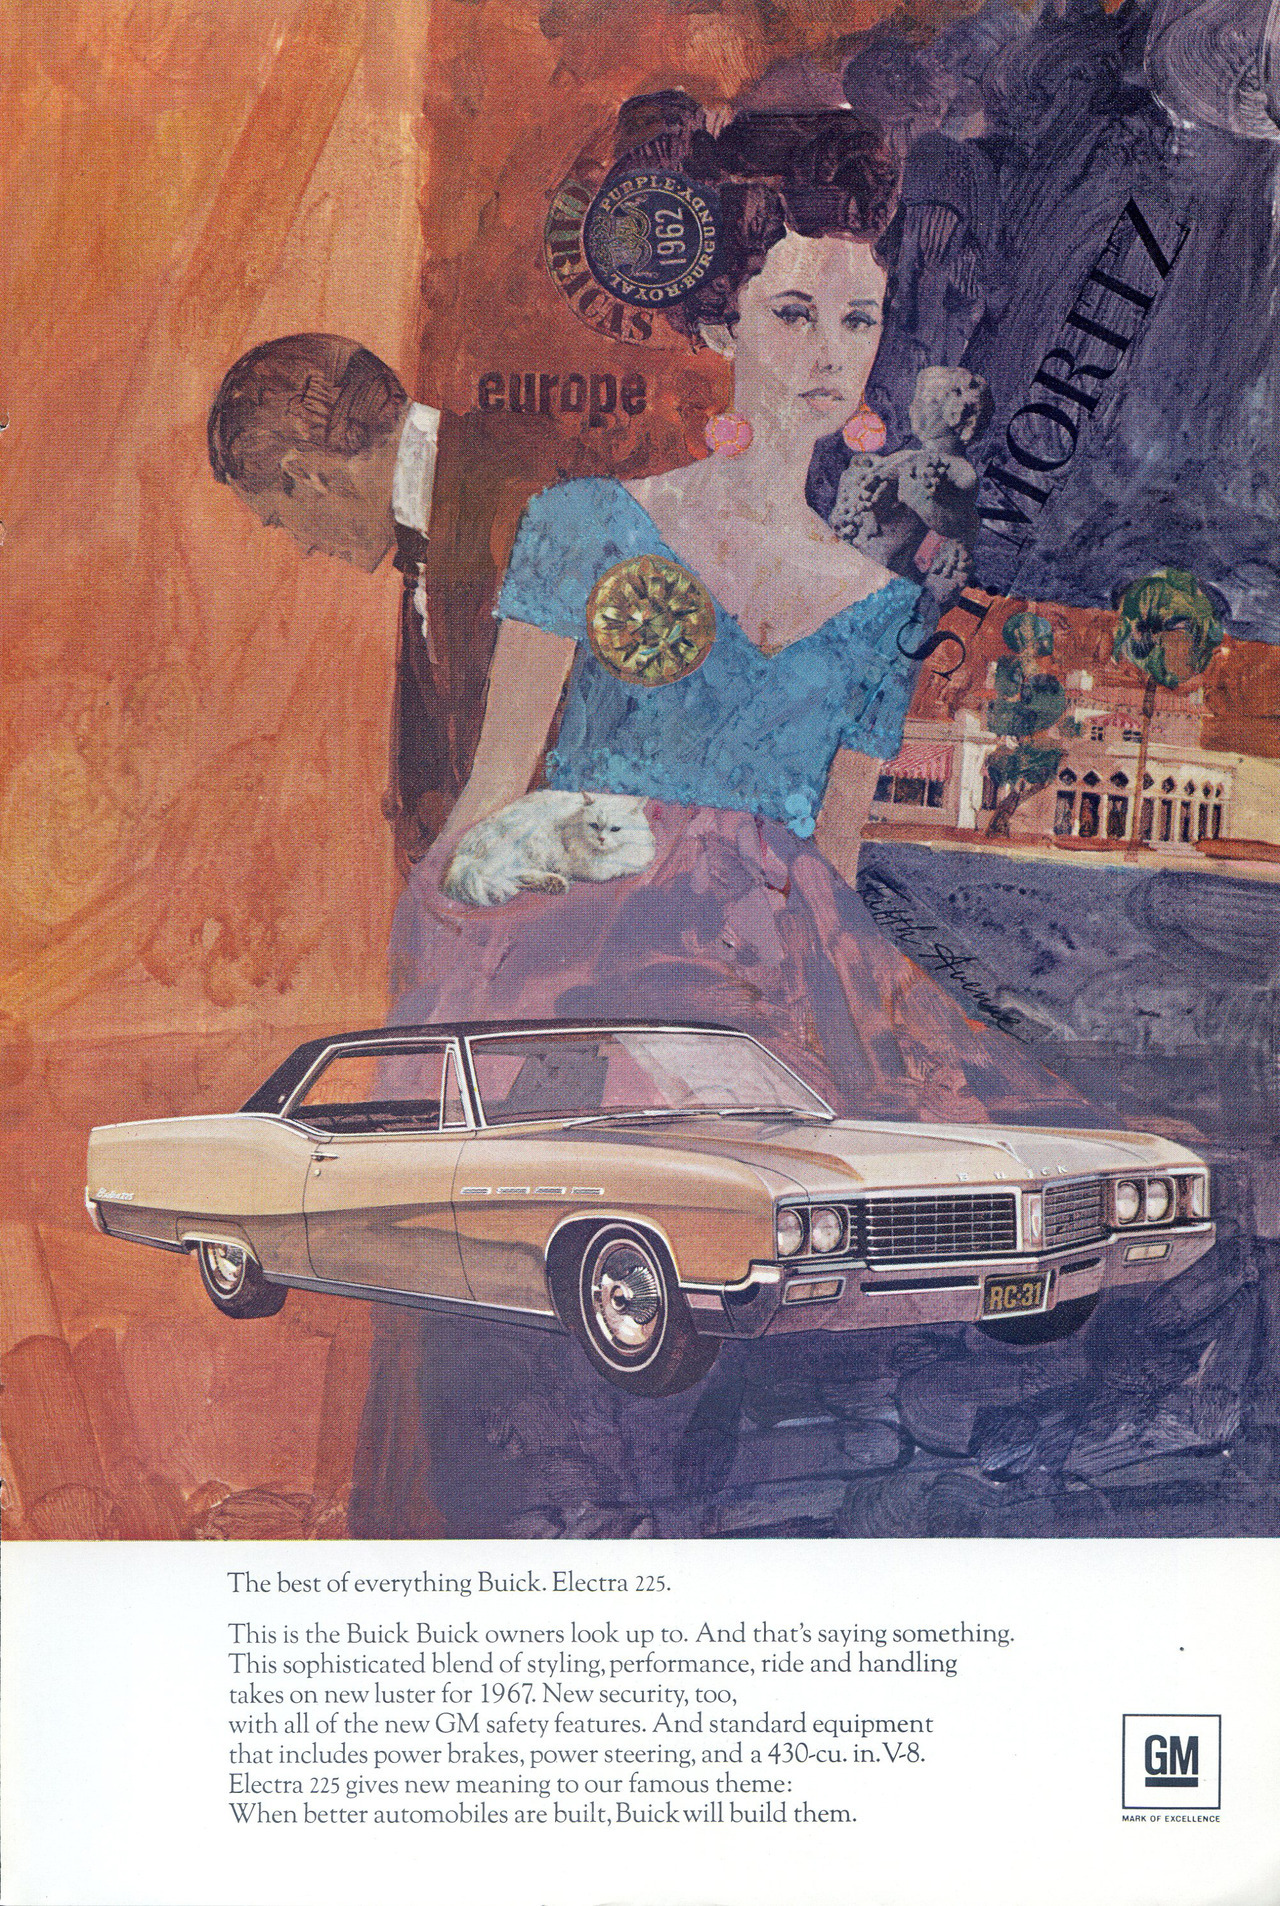 1967 Buick Electra 225 - published in National Geographic - December 1966